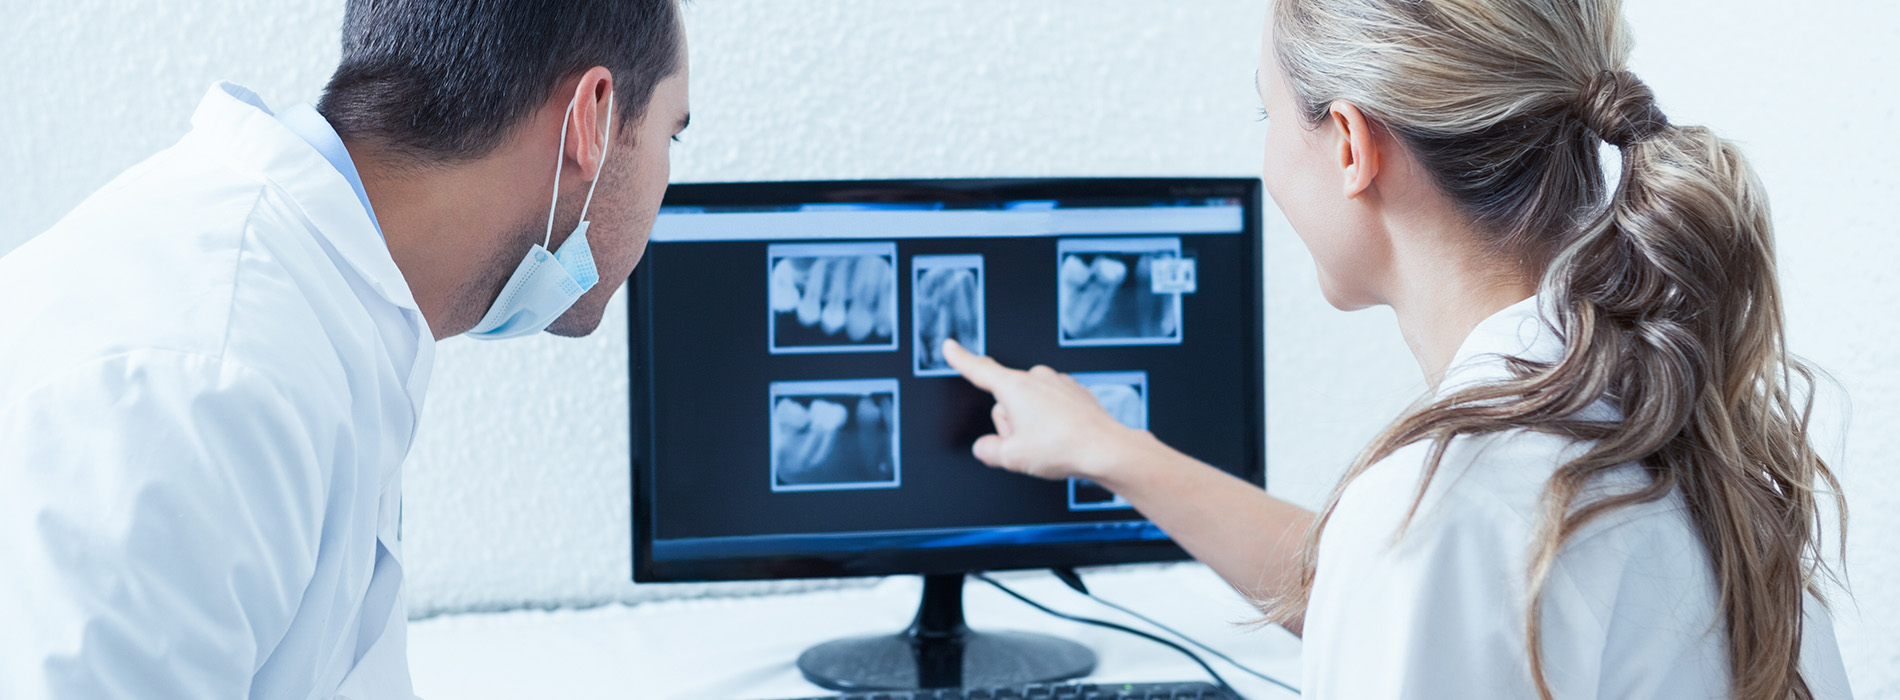 An image of a medical professional showing a patient s X-ray on a screen to the patient, who is seated and attentively looking at it.